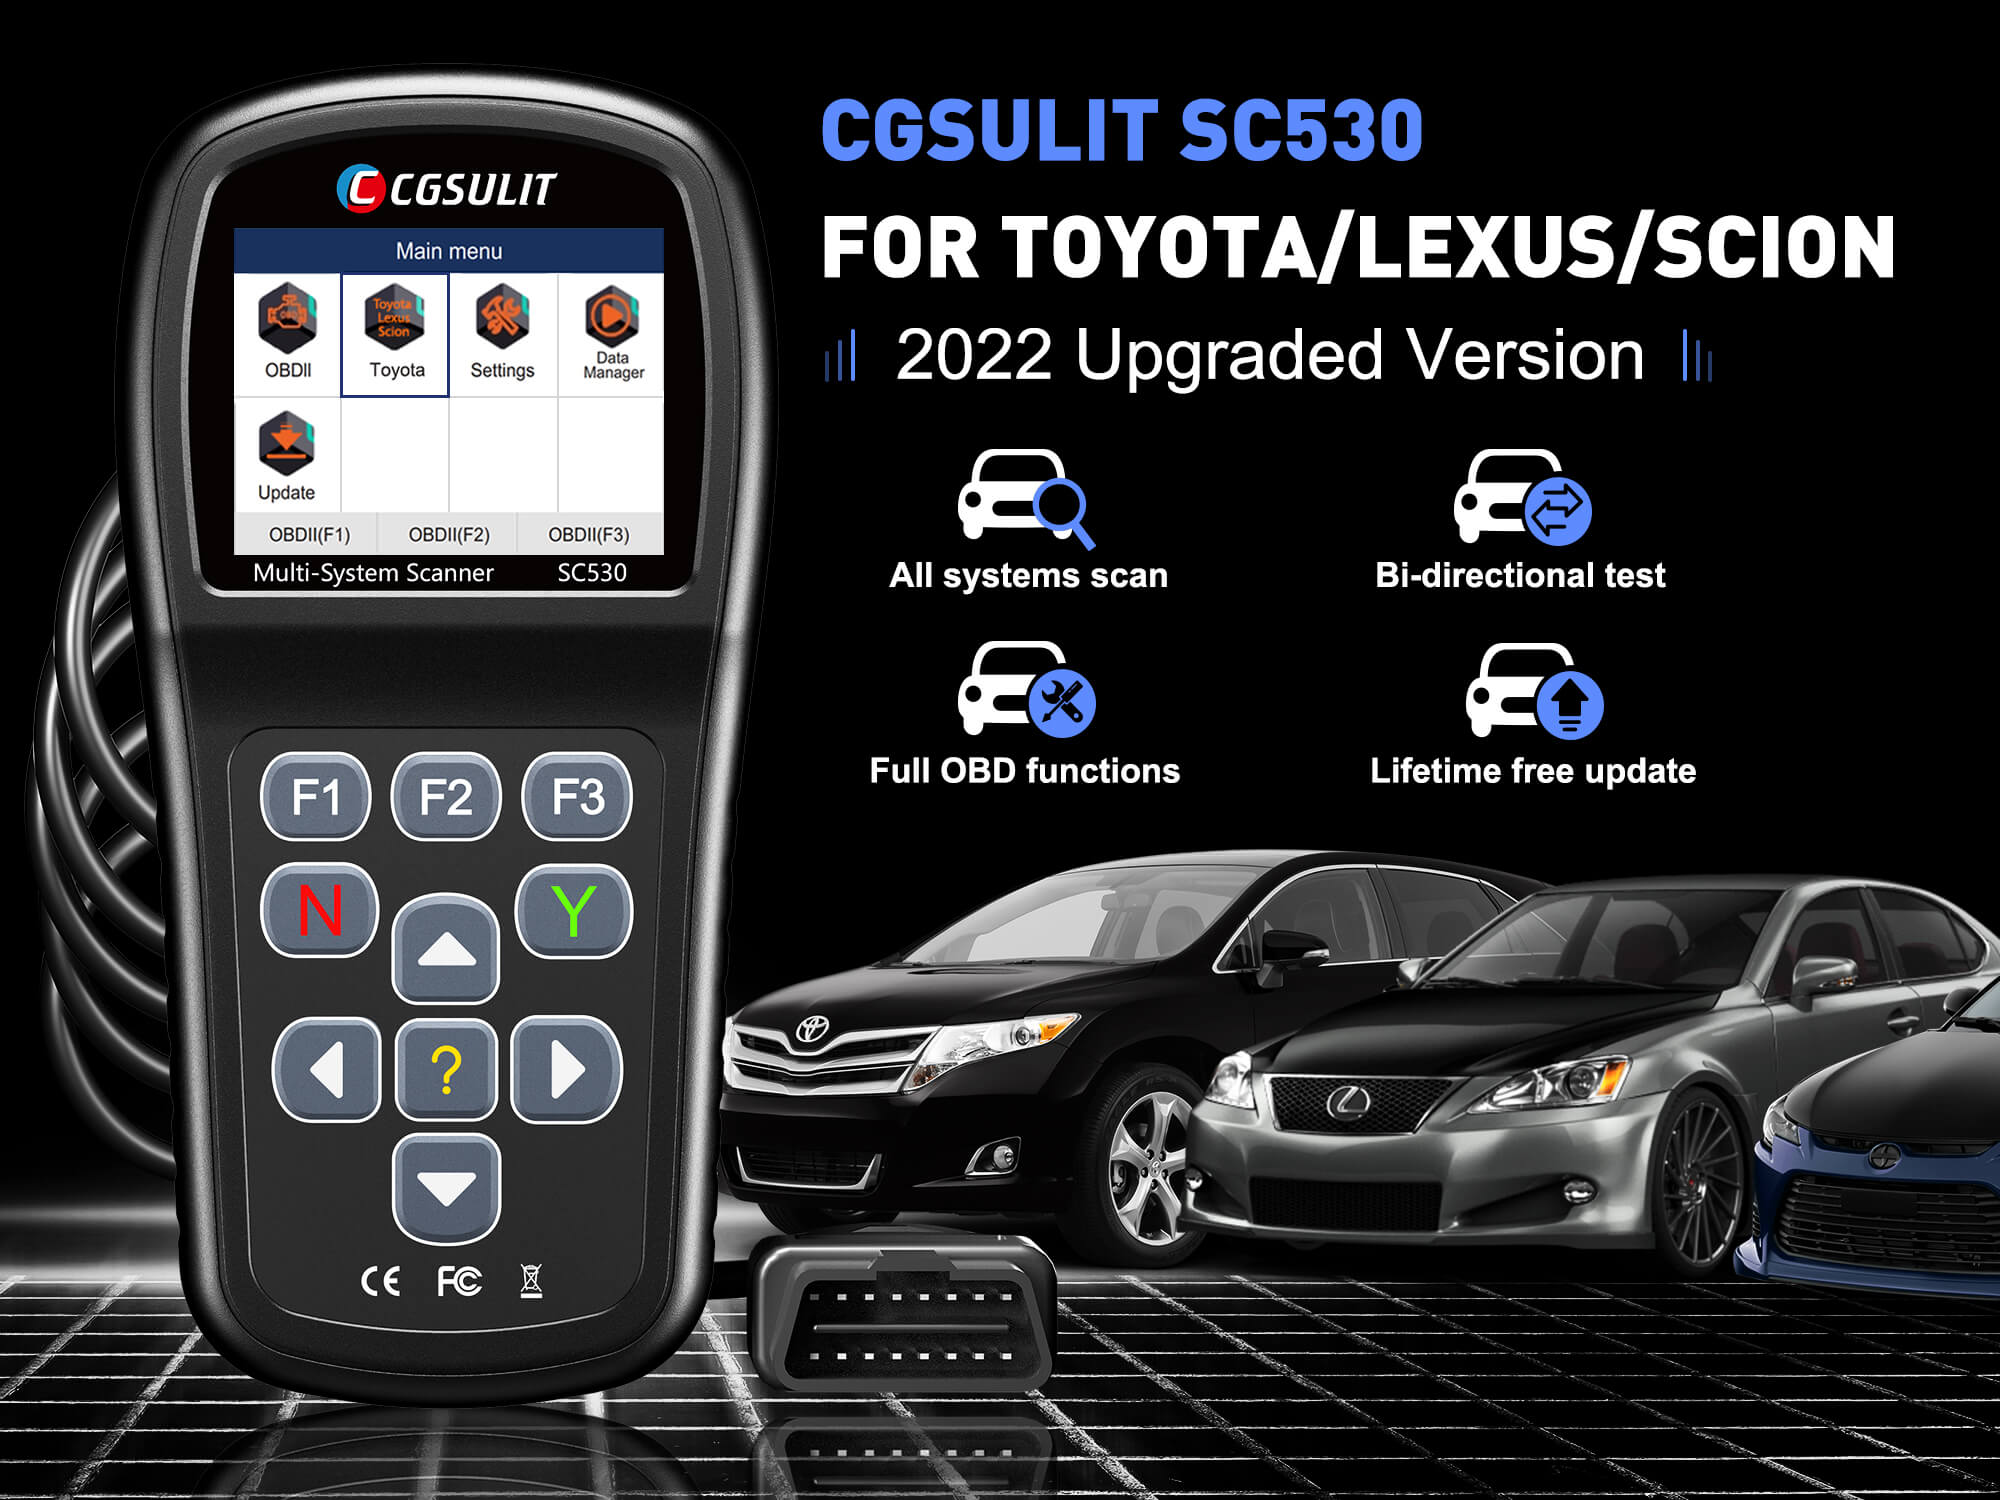 SC530 full system scanner can easily diagnose which systems have what wrongs with your Toyota/ Lexus/ Scion.